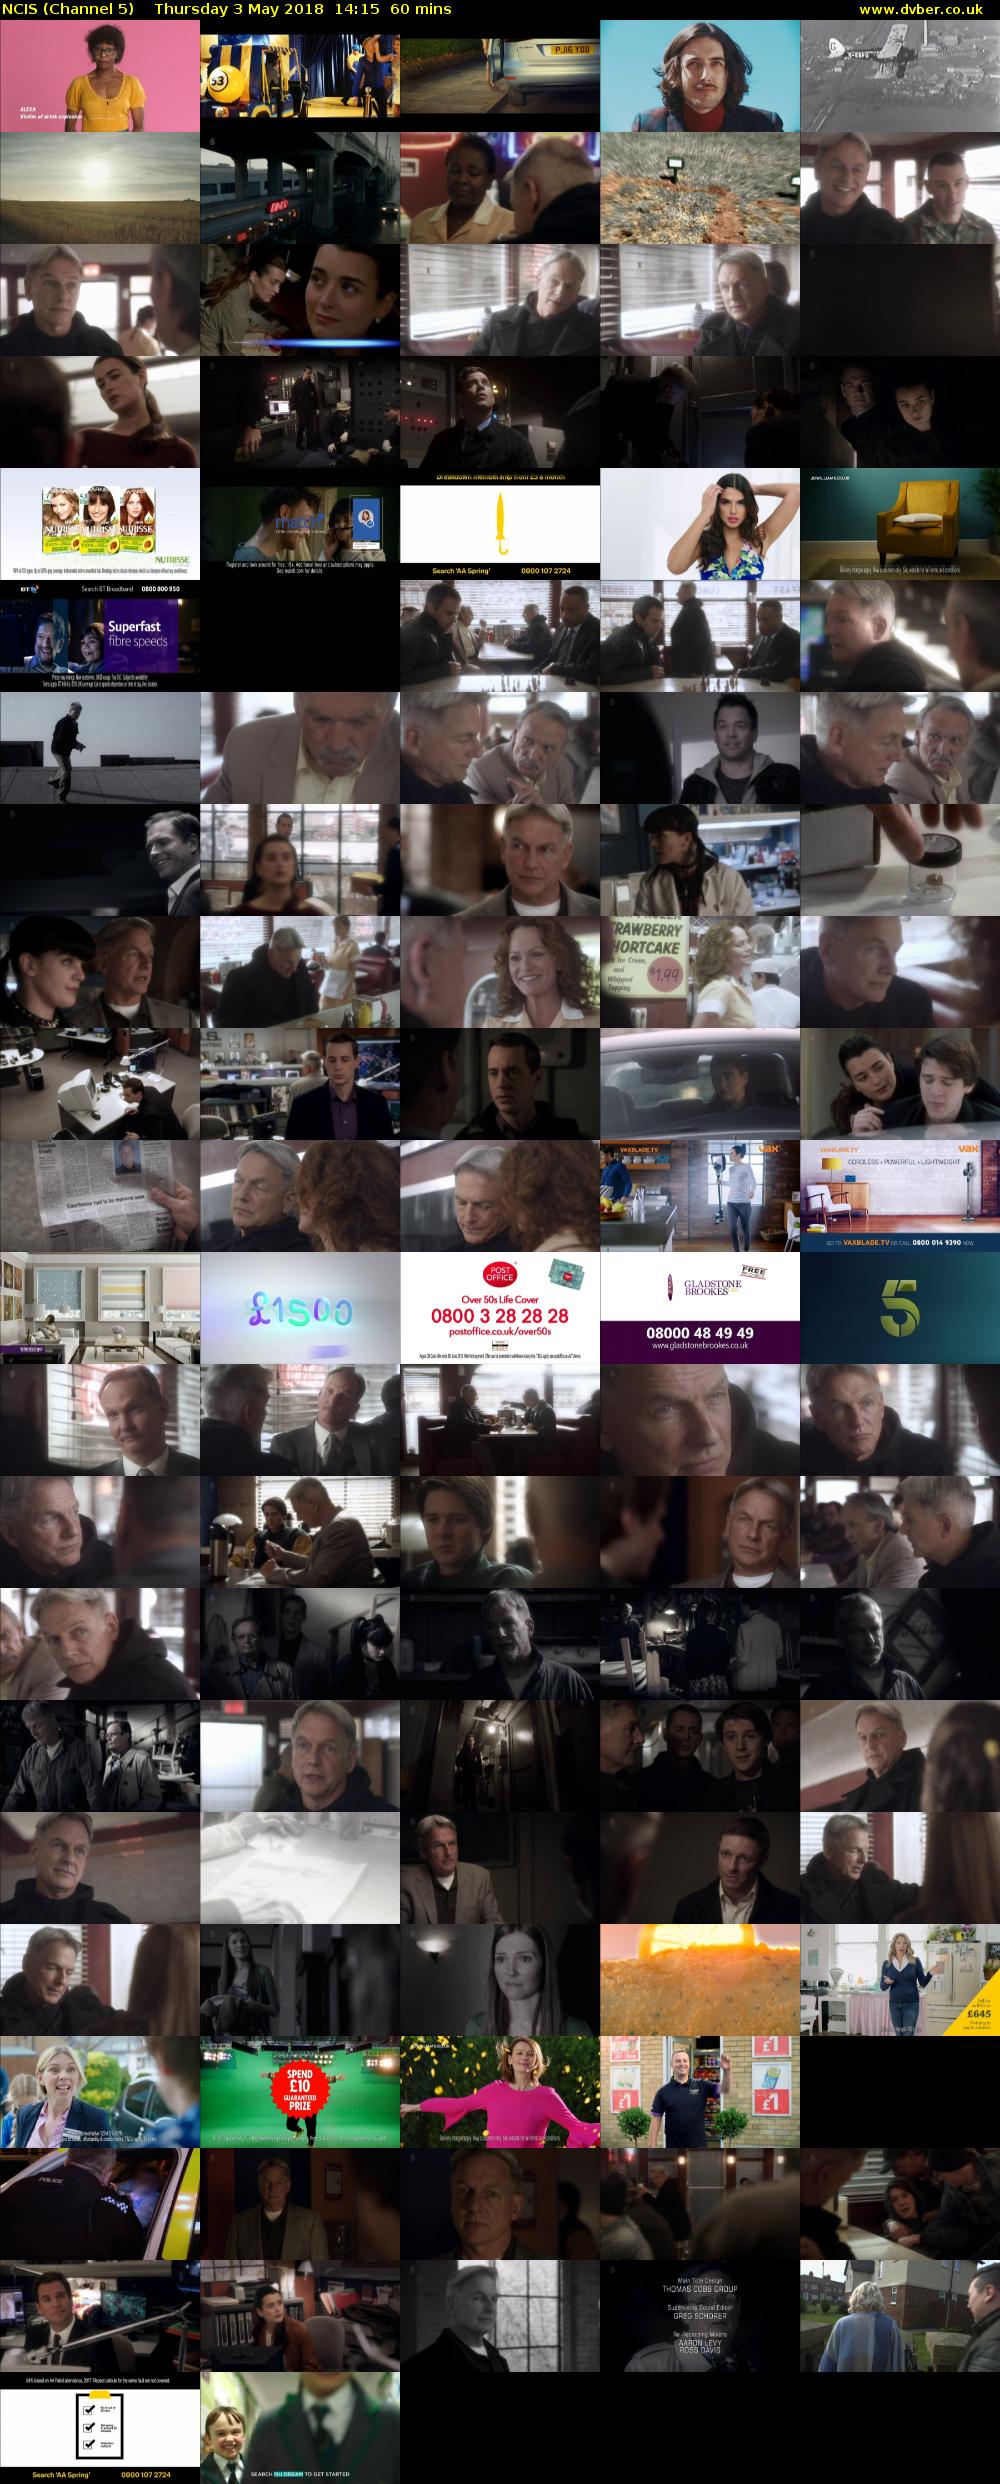 NCIS (Channel 5) Thursday 3 May 2018 14:15 - 15:15